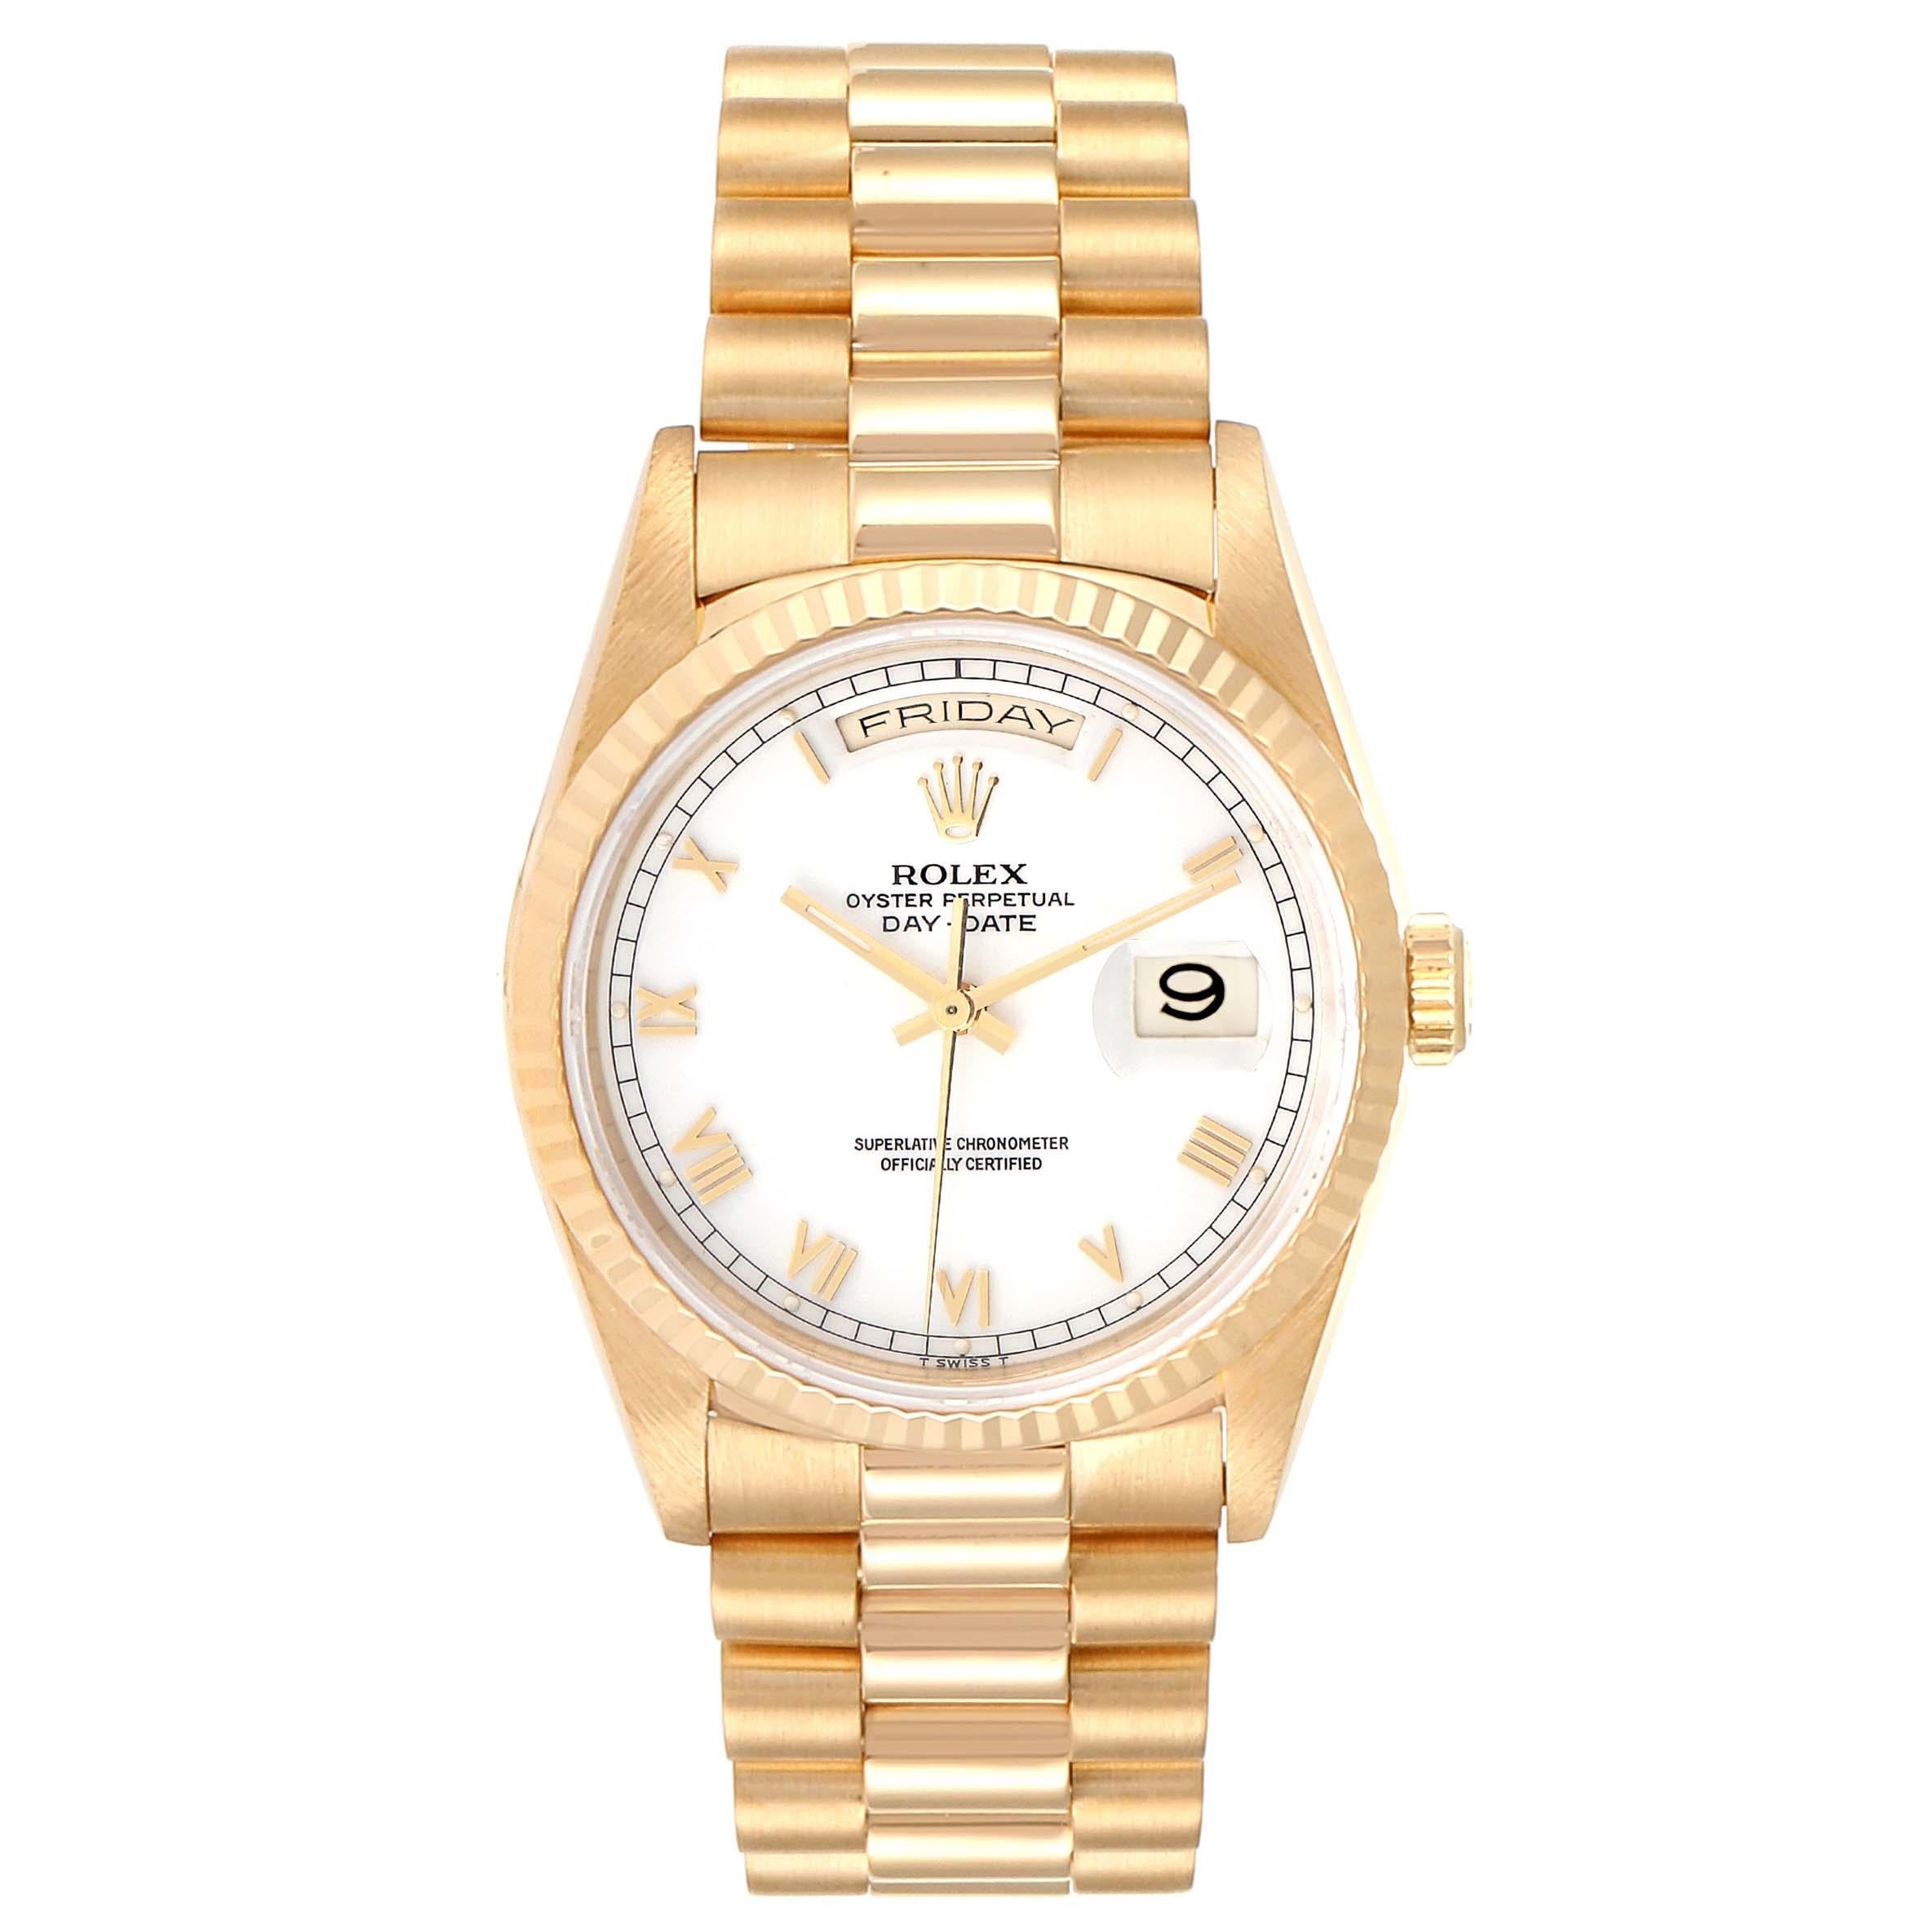 Rolex President Day-Date 18k Yellow Gold White Dial Mens Watch 18238. Officially certified chronometer self-winding movement. 18k yellow gold oyster case 36.0 mm in diameter. Rolex logo on a crown. 18K yellow gold fluted bezel. Scratch resistant